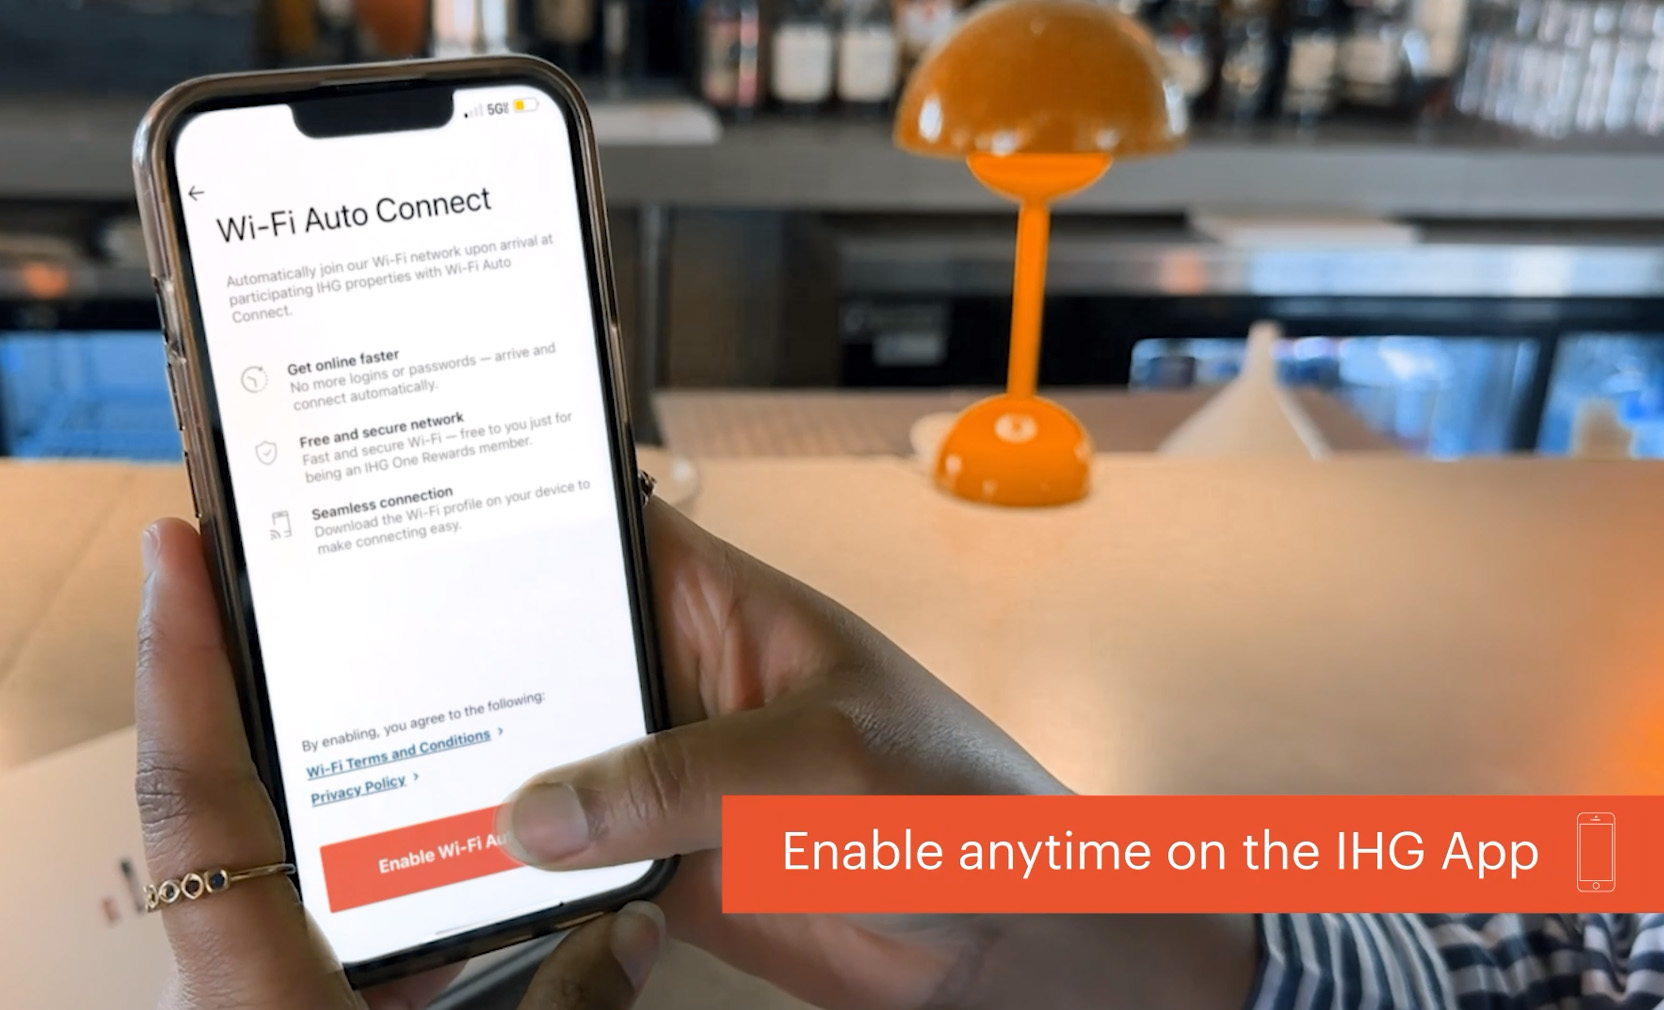 IHG One Rewards loyalty members can now connect their devices to hotel Wi-Fi seamlessly via the IHG app.